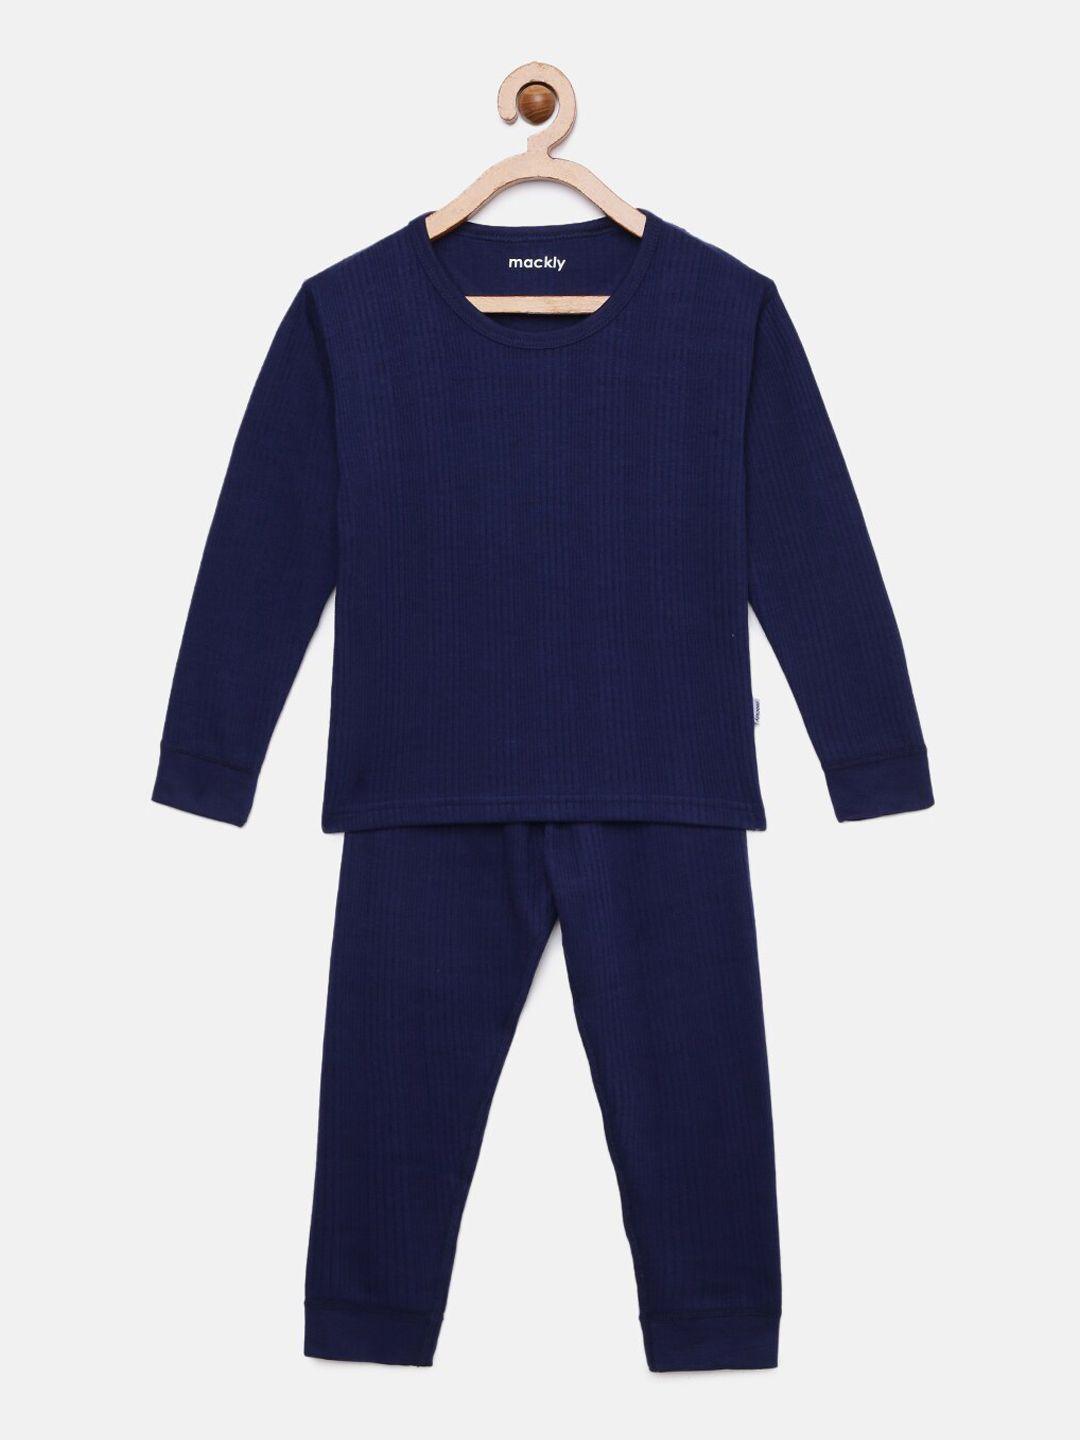 mackly-infants-striped-round-neck-thermal-set